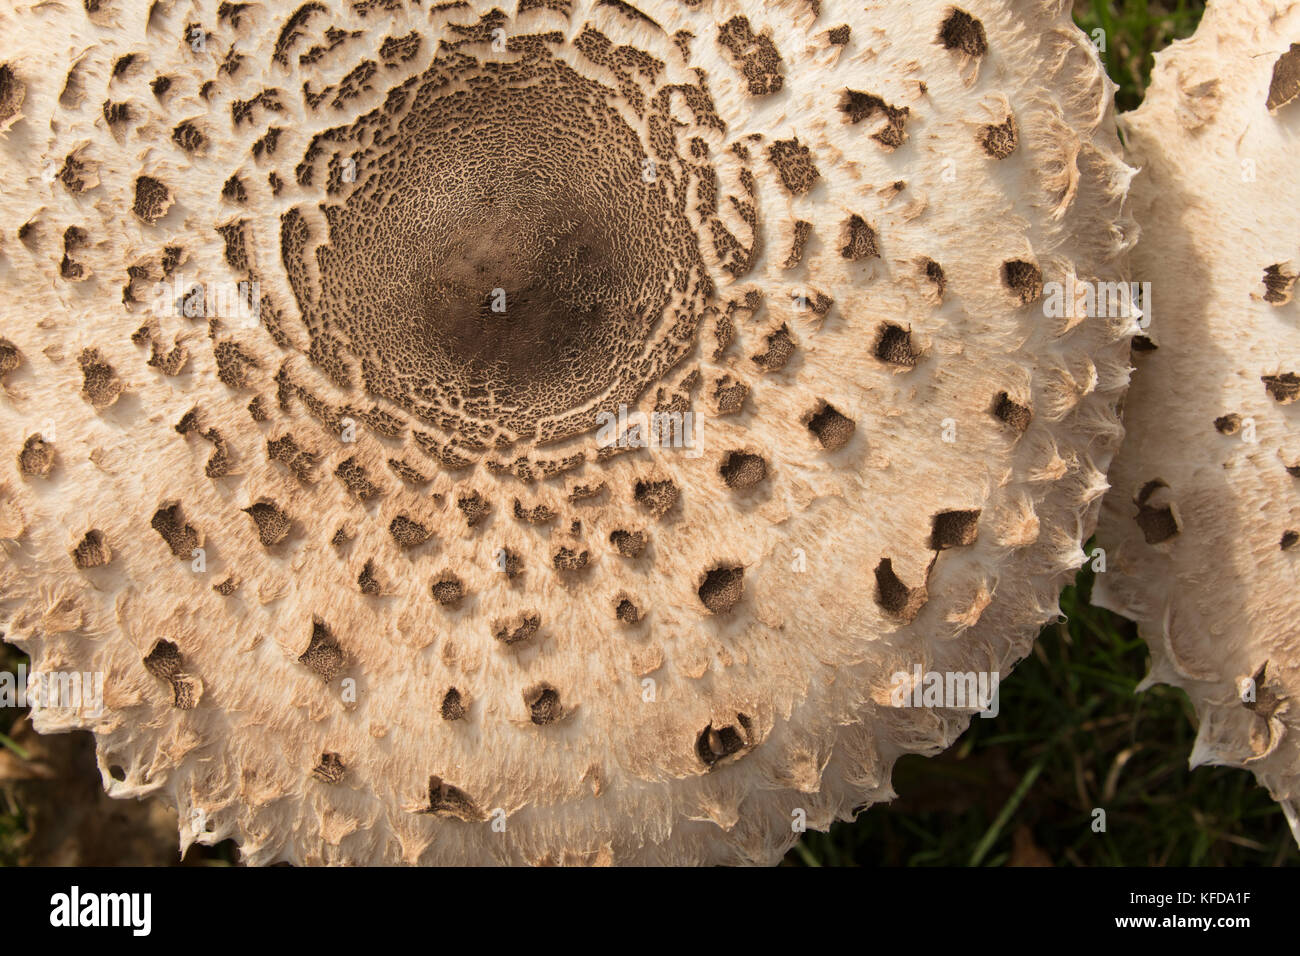 Cap of the parasol mushroom showing the characteristic feathering of this large edible fungus. Stock Photo